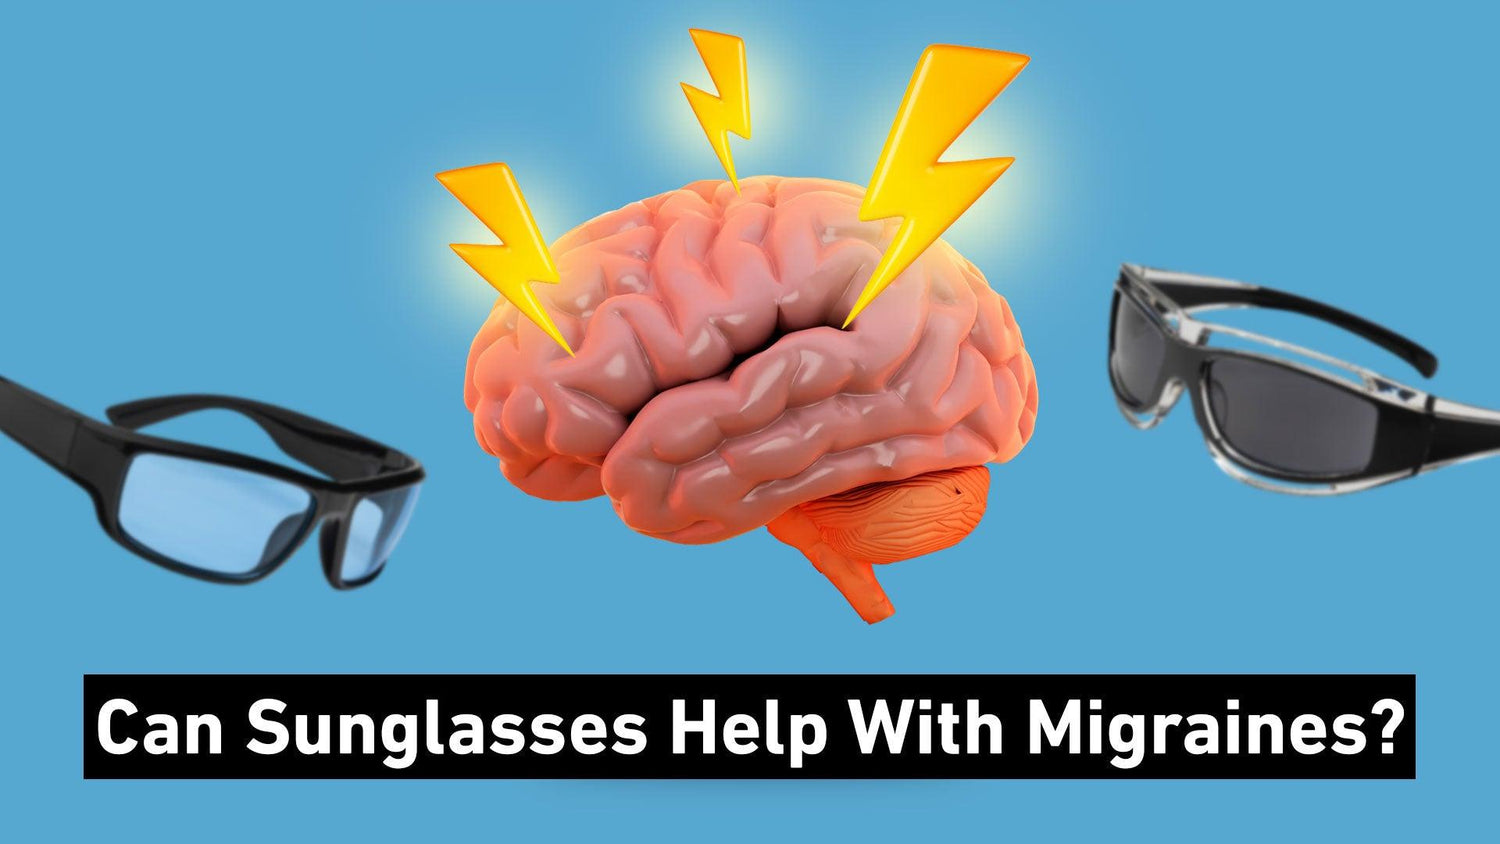 Can Sunglasses Help With Migraines?